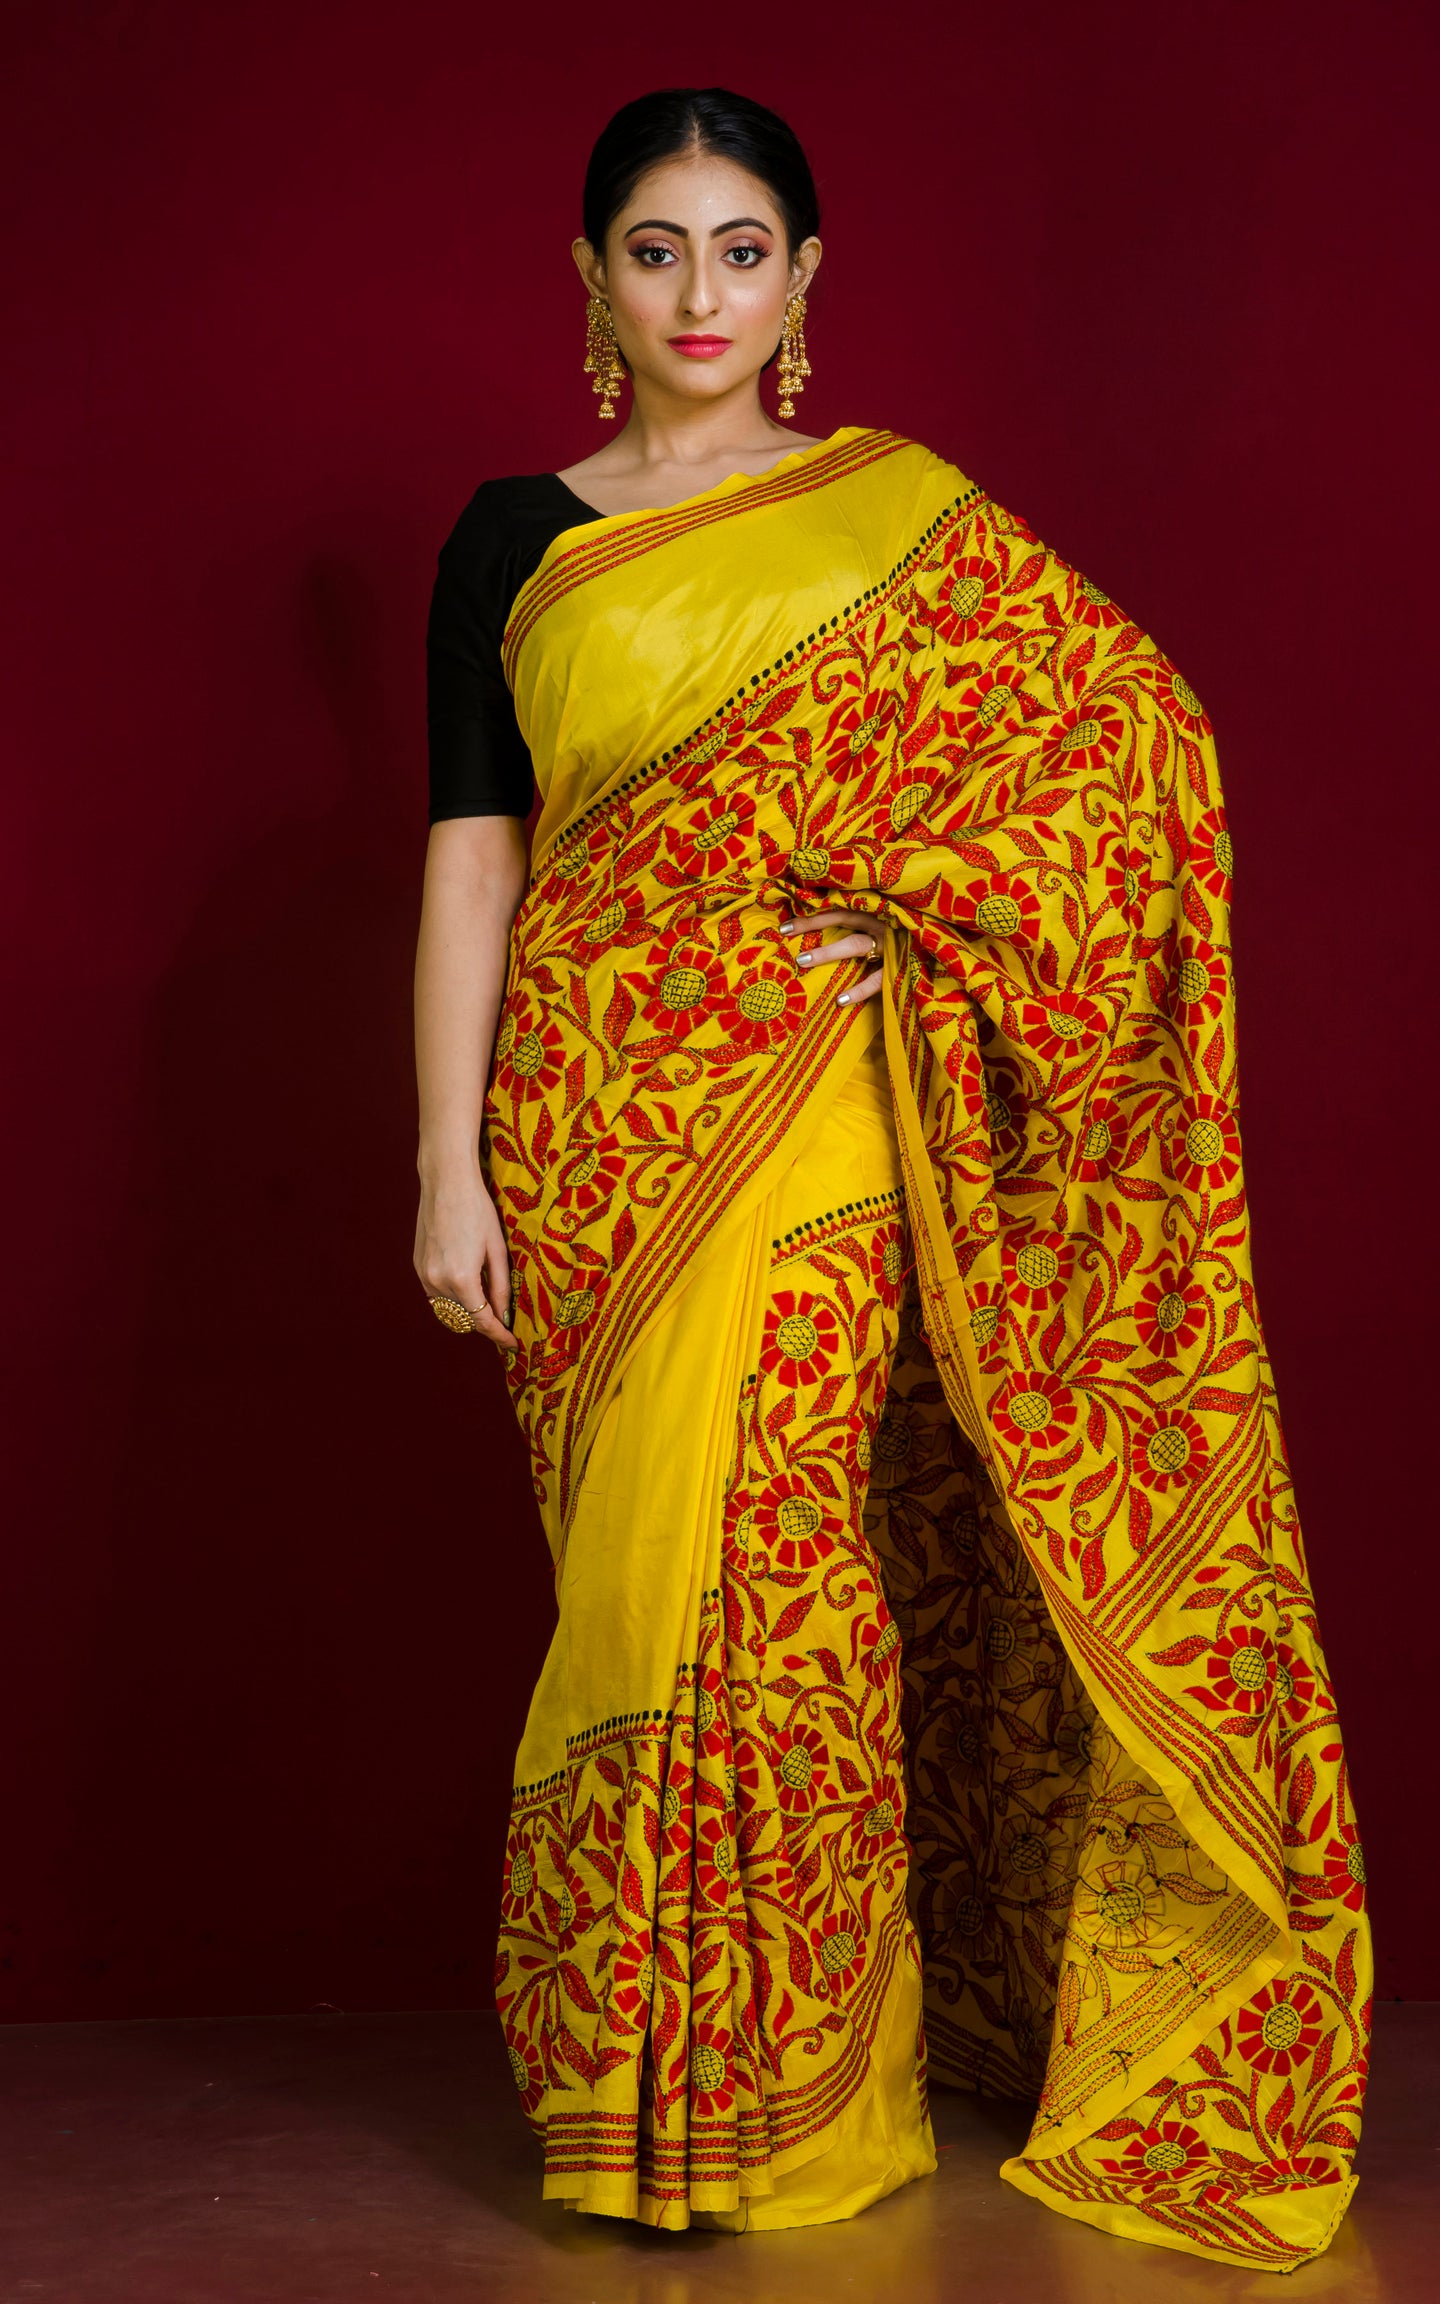 Pure Silk Hand Embroidery Kantha Stitch Saree in Bright Yellow, Red and Black